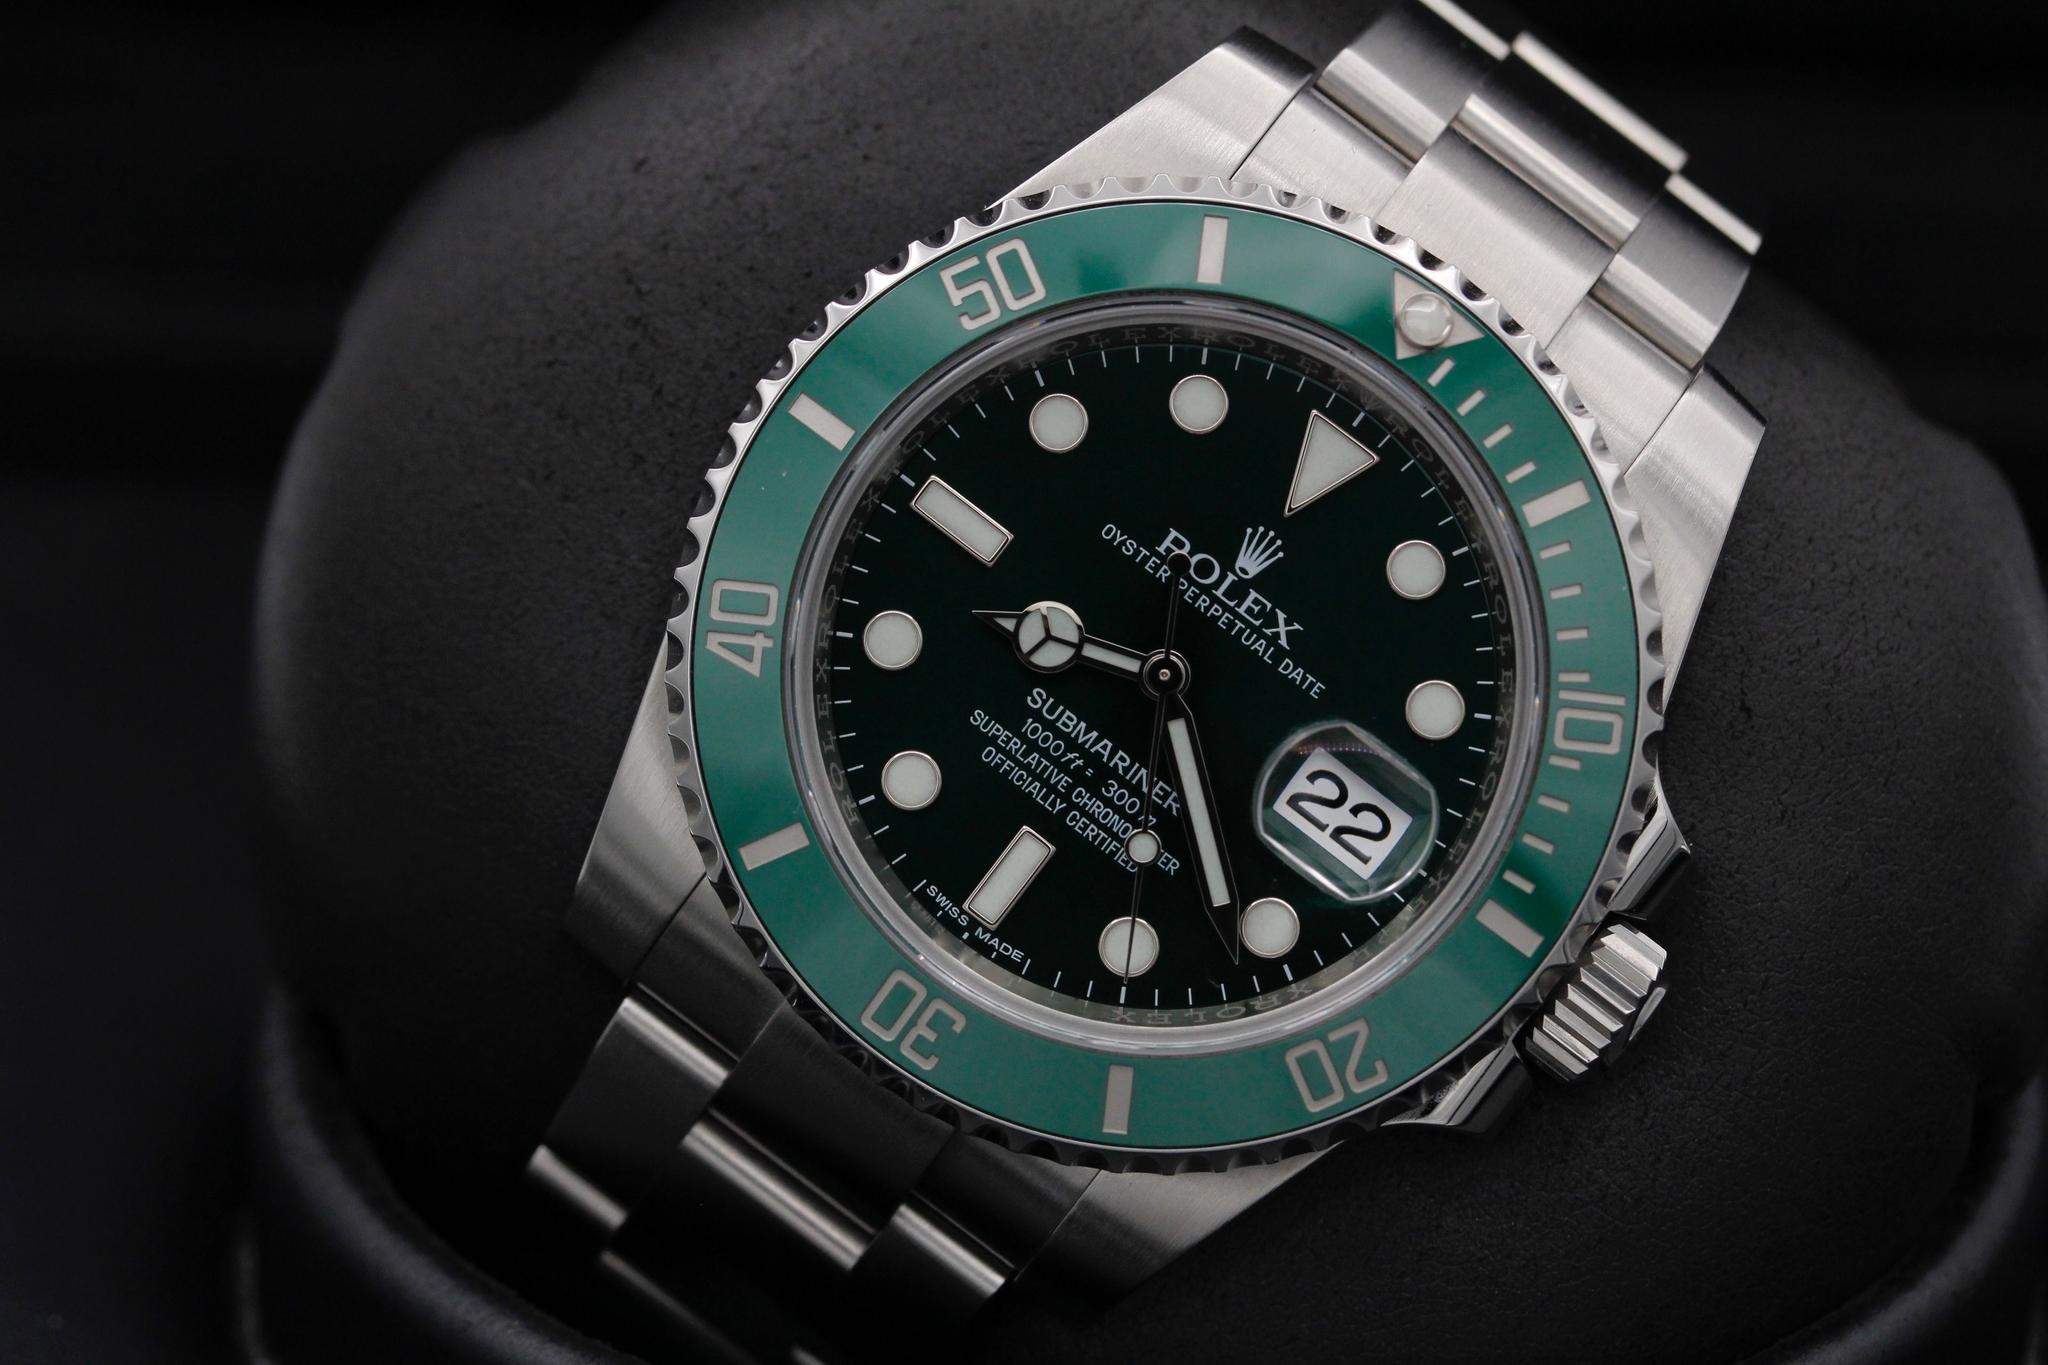 Rolex submariner Hulk 2013 116610LV with Box and Papers MINT condition